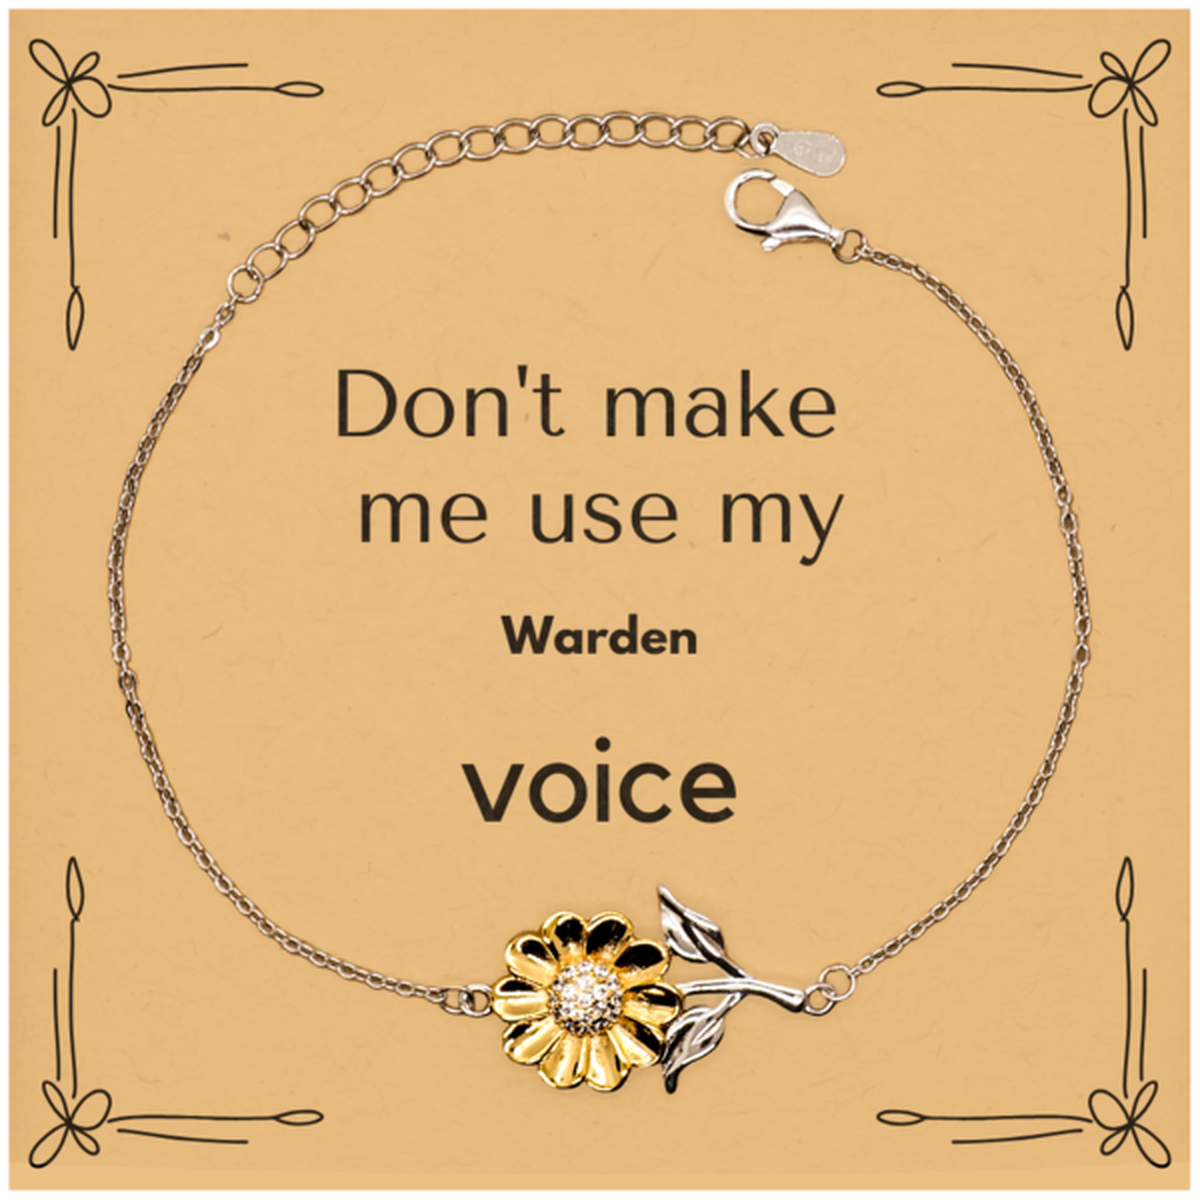 Don't make me use my Warden voice, Sarcasm Warden Card Gifts, Christmas Warden Sunflower Bracelet Birthday Unique Gifts For Warden Coworkers, Men, Women, Colleague, Friends